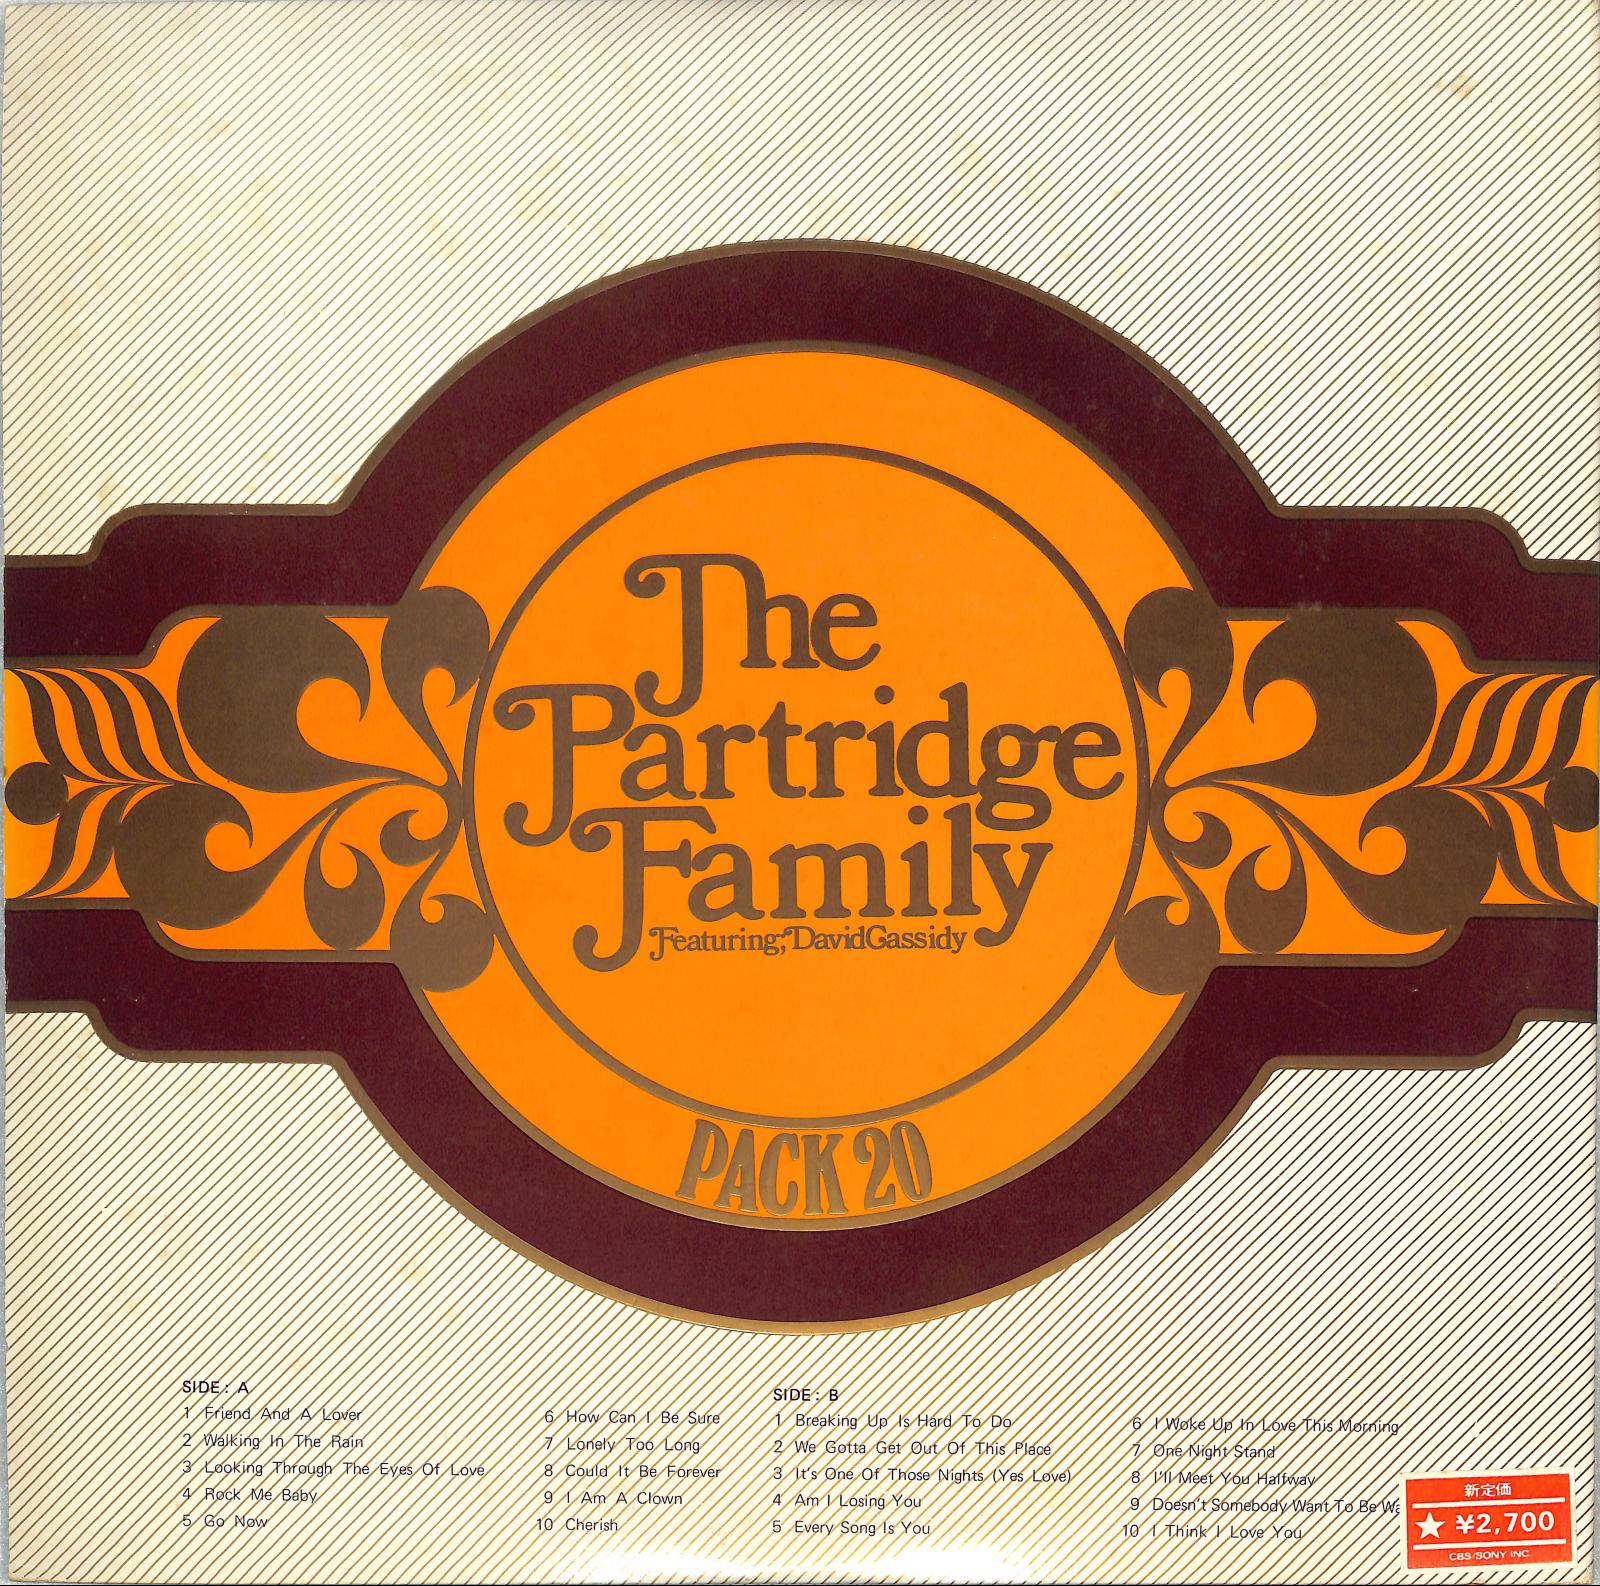 THE PARTRIDGE FAMILY feat. DAVID CASSIDY - The Partridge Family Featuring: David Cassidy